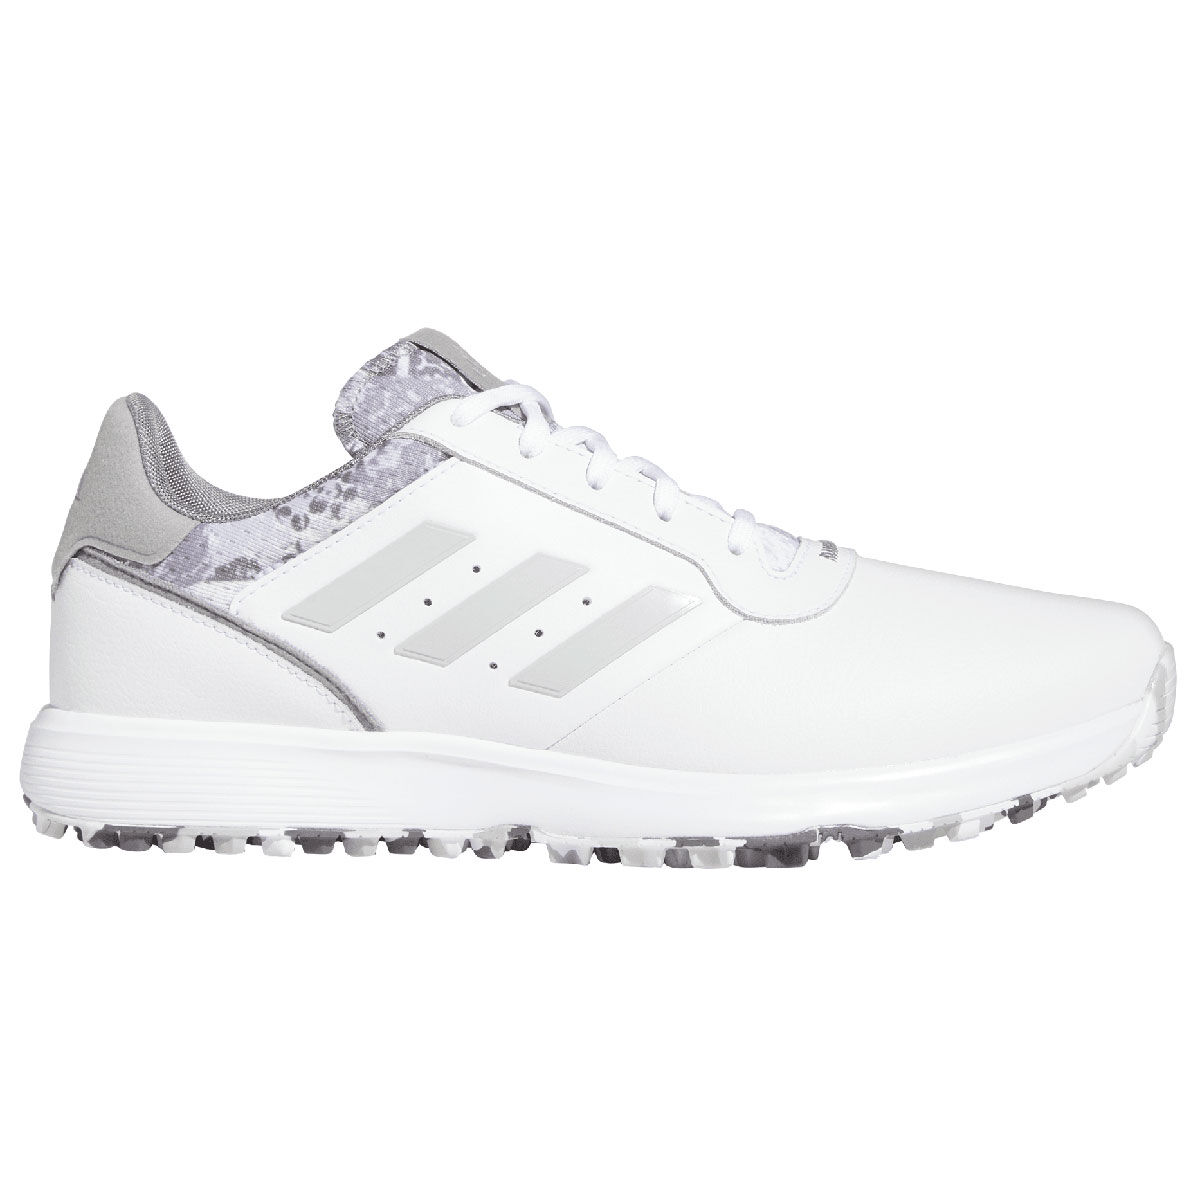 adidas Golf Mens White and Grey Lightweight S2G Leather Waterproof Spikeless Regular Fit Golf Shoes, Size: 7 | American Golf